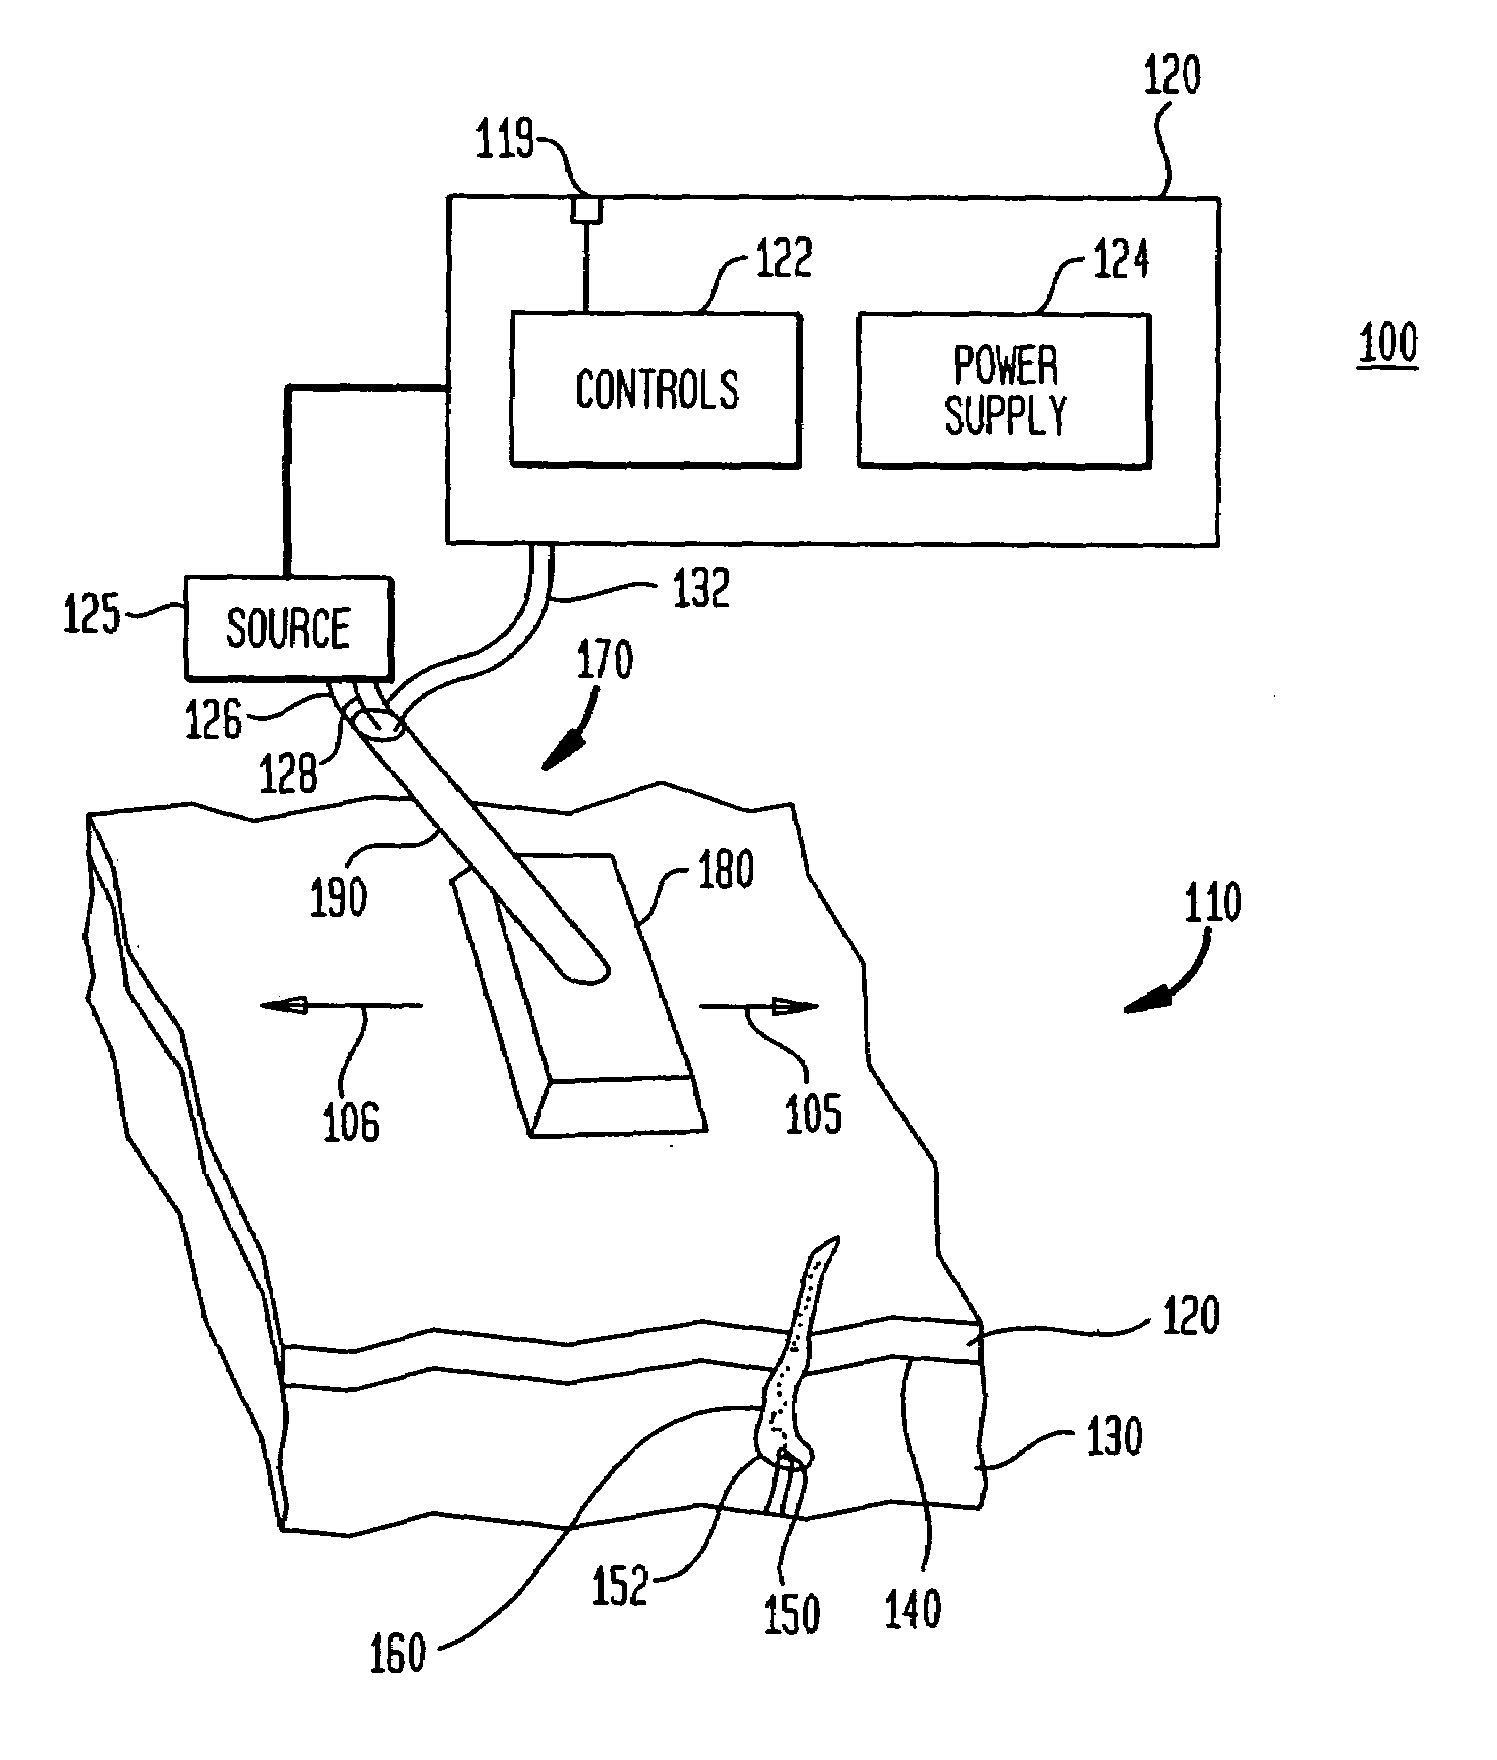 Cooling system for a photo cosmetic device